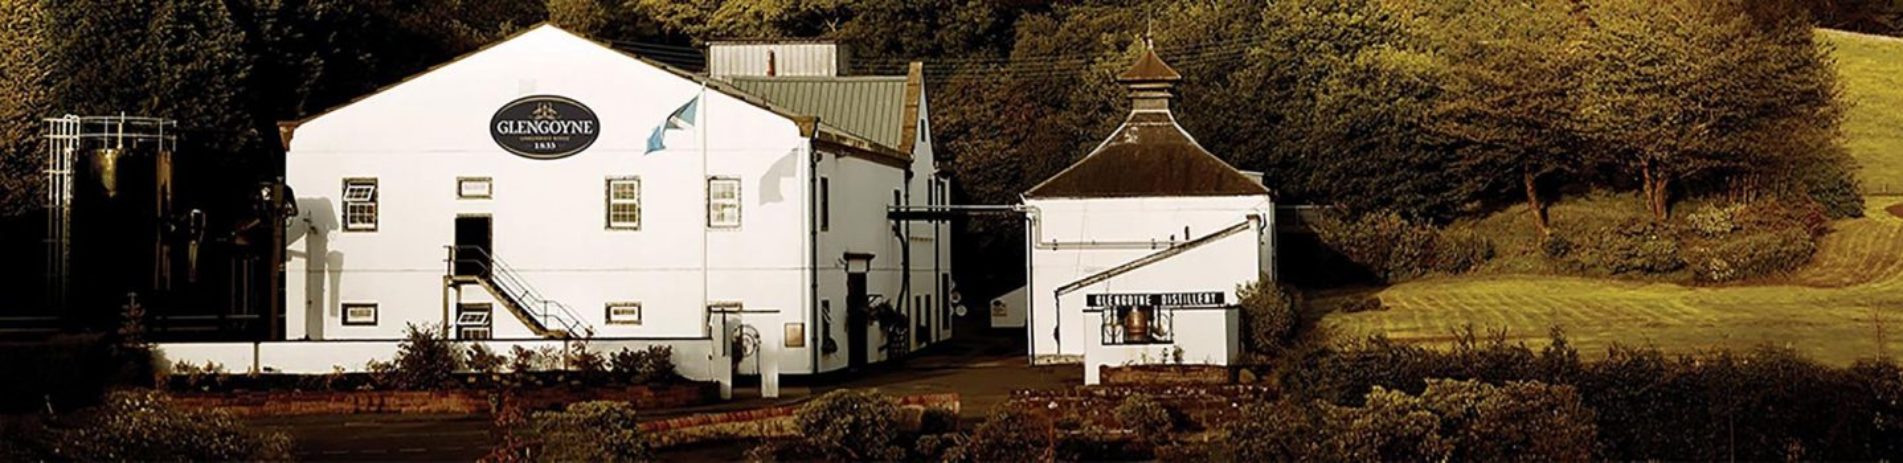 glengoyne-distillery-at-edge-of-forest-and-dumgoyne-hill